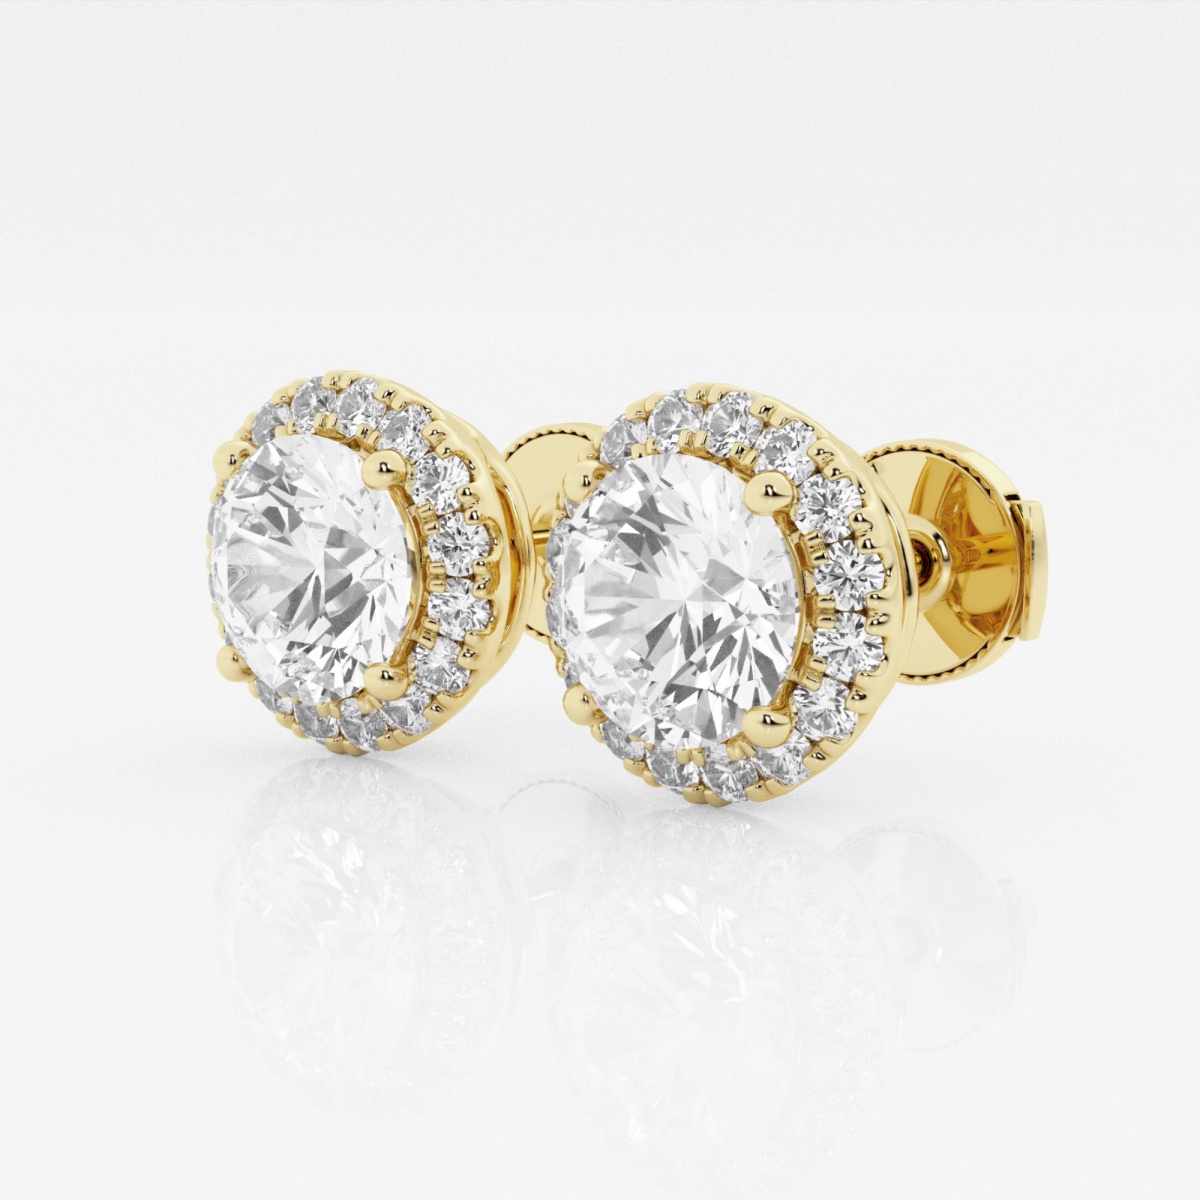 Additional Image 1 for  3 1/2 ctw Round Lab Grown Diamond Halo Certified Stud Earrings